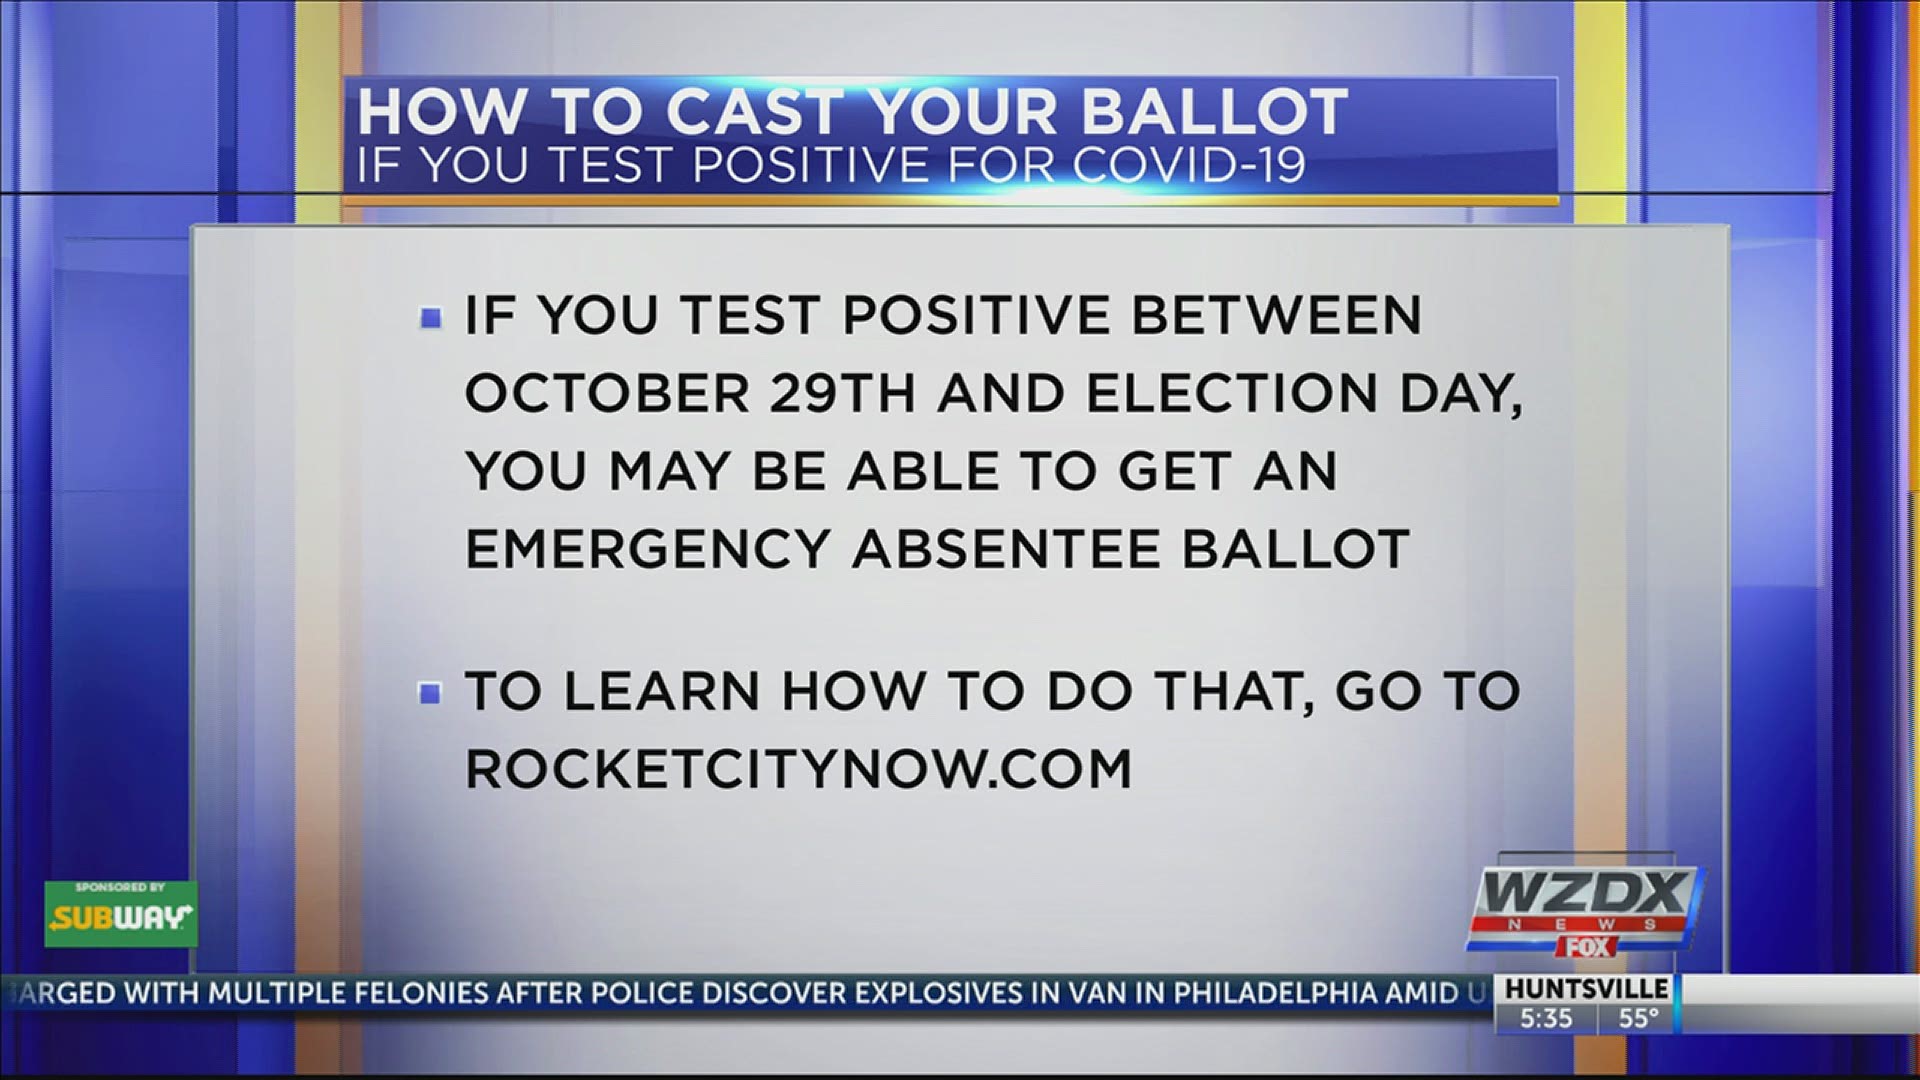 What happens if you want to vote in person but test positive for COVID-19 before election day?